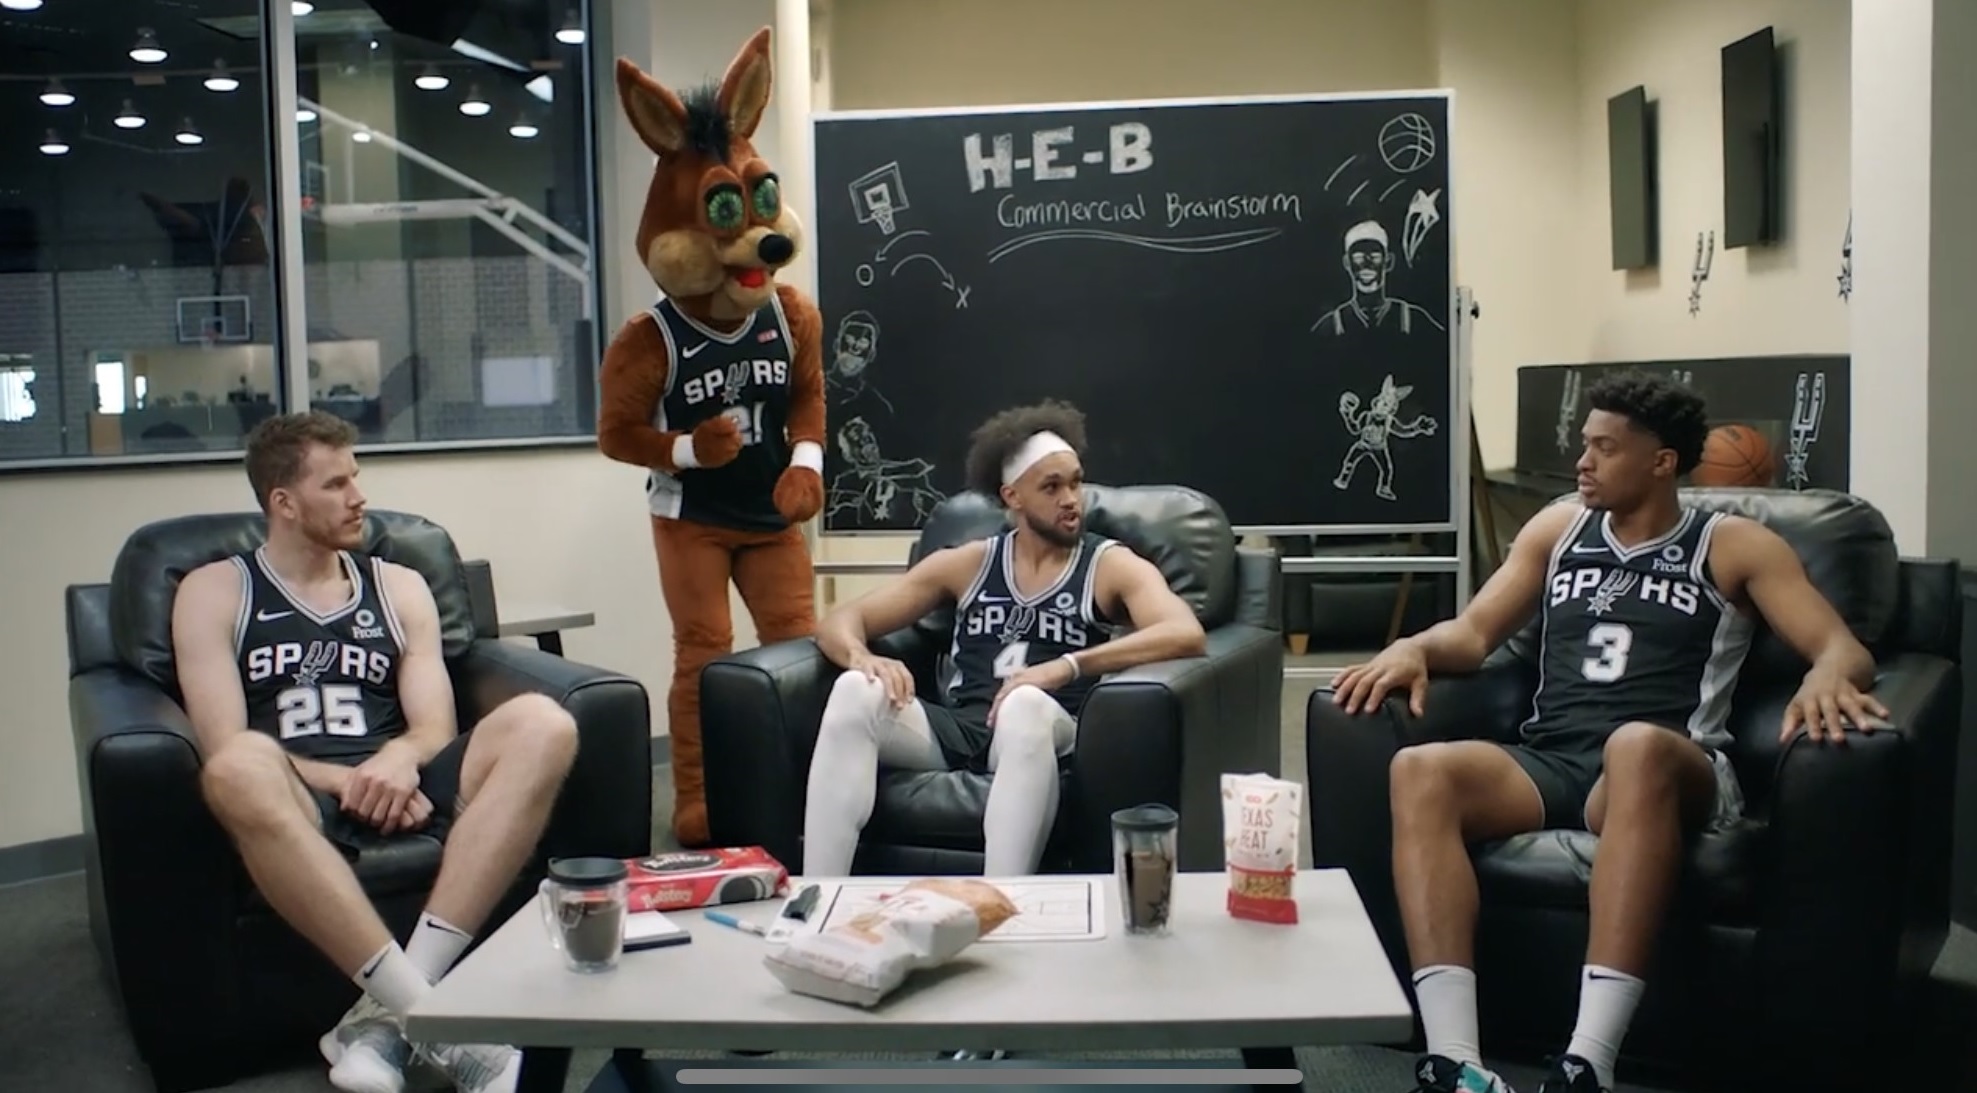 H-E-B and Spurs are San Antonio's home teams in new commercials - H-E-B  Newsroom